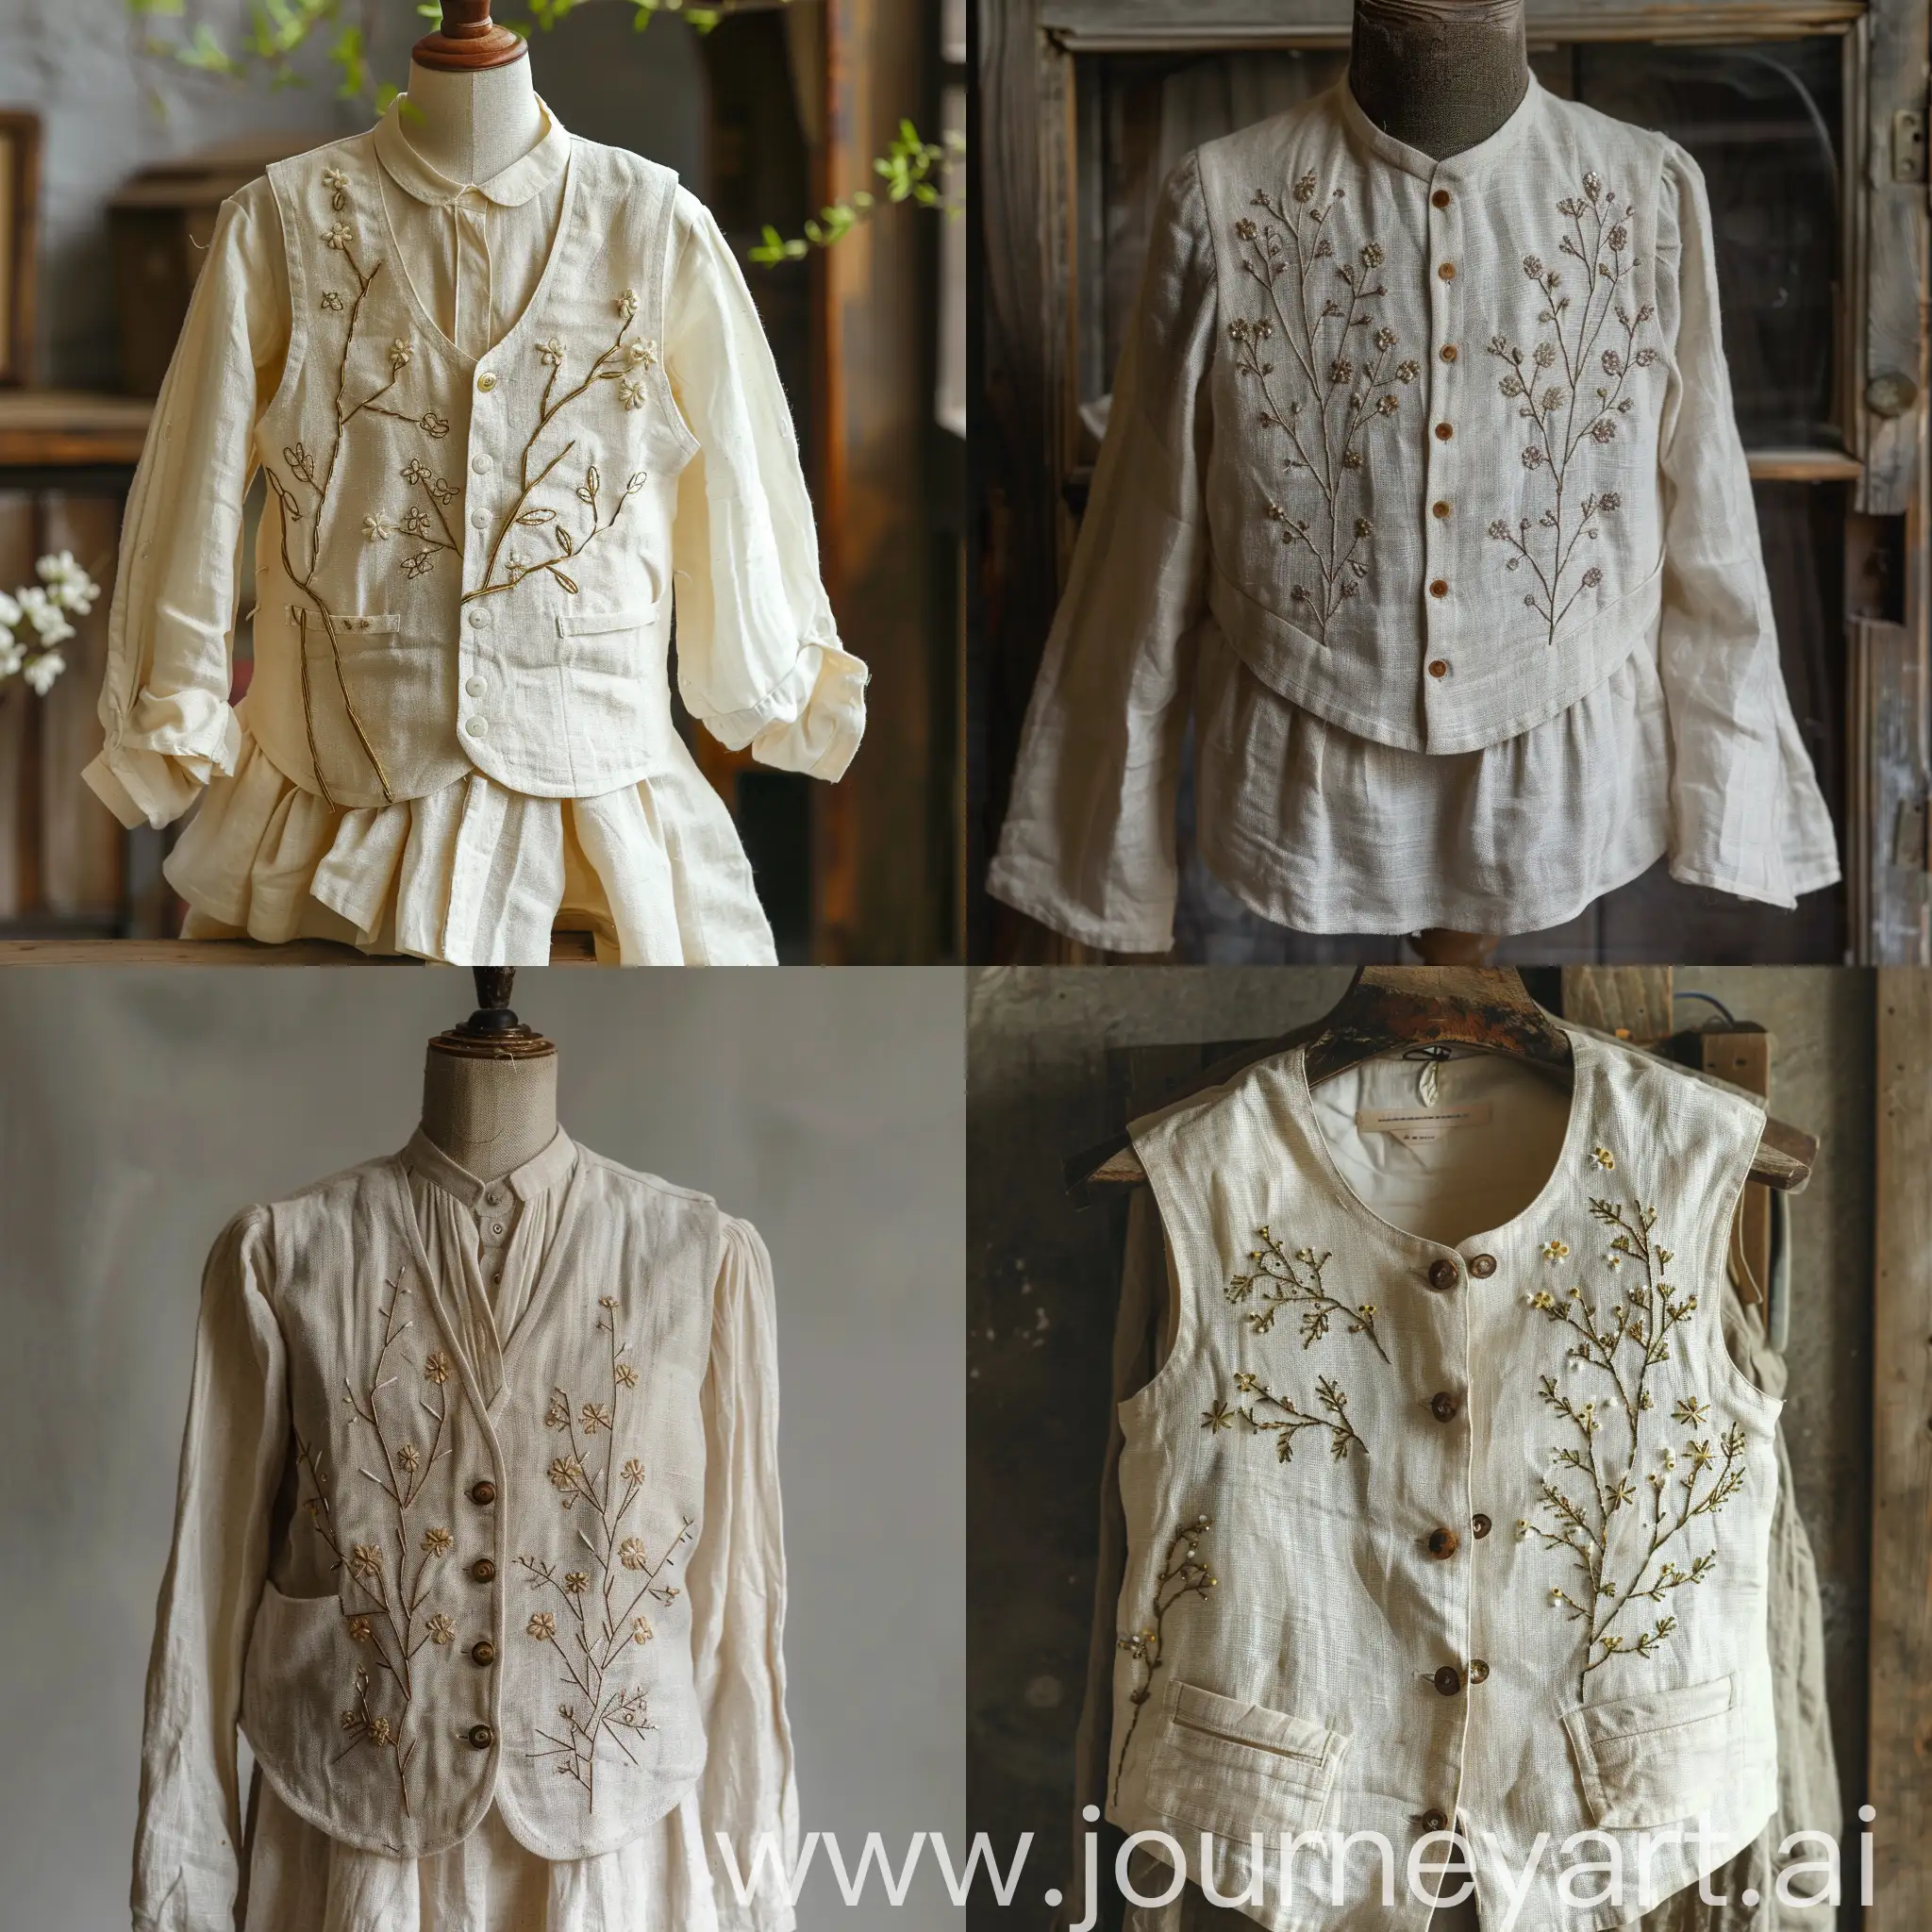 A blouse and a vest, cream linen, branch and small flower embroidery, button front